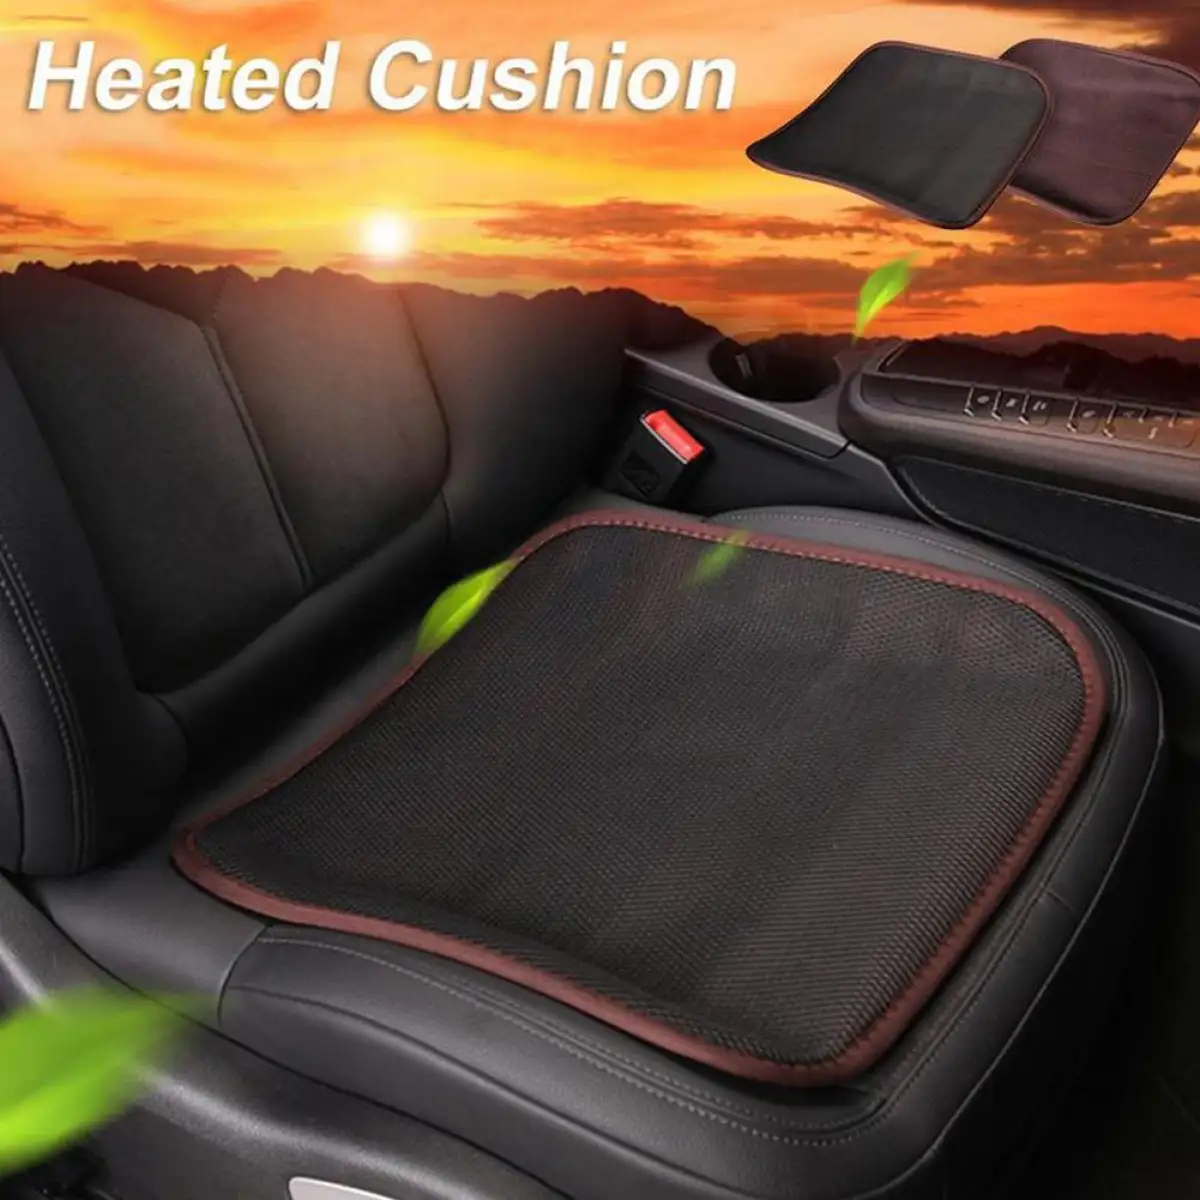 2pc Car Heated Seat Cushion Usb Chair Warmer 12v Heated Chair Supplies Cover Warm Office For Auto Home Heated Pad Seat Nonslip K3s1 Lazada